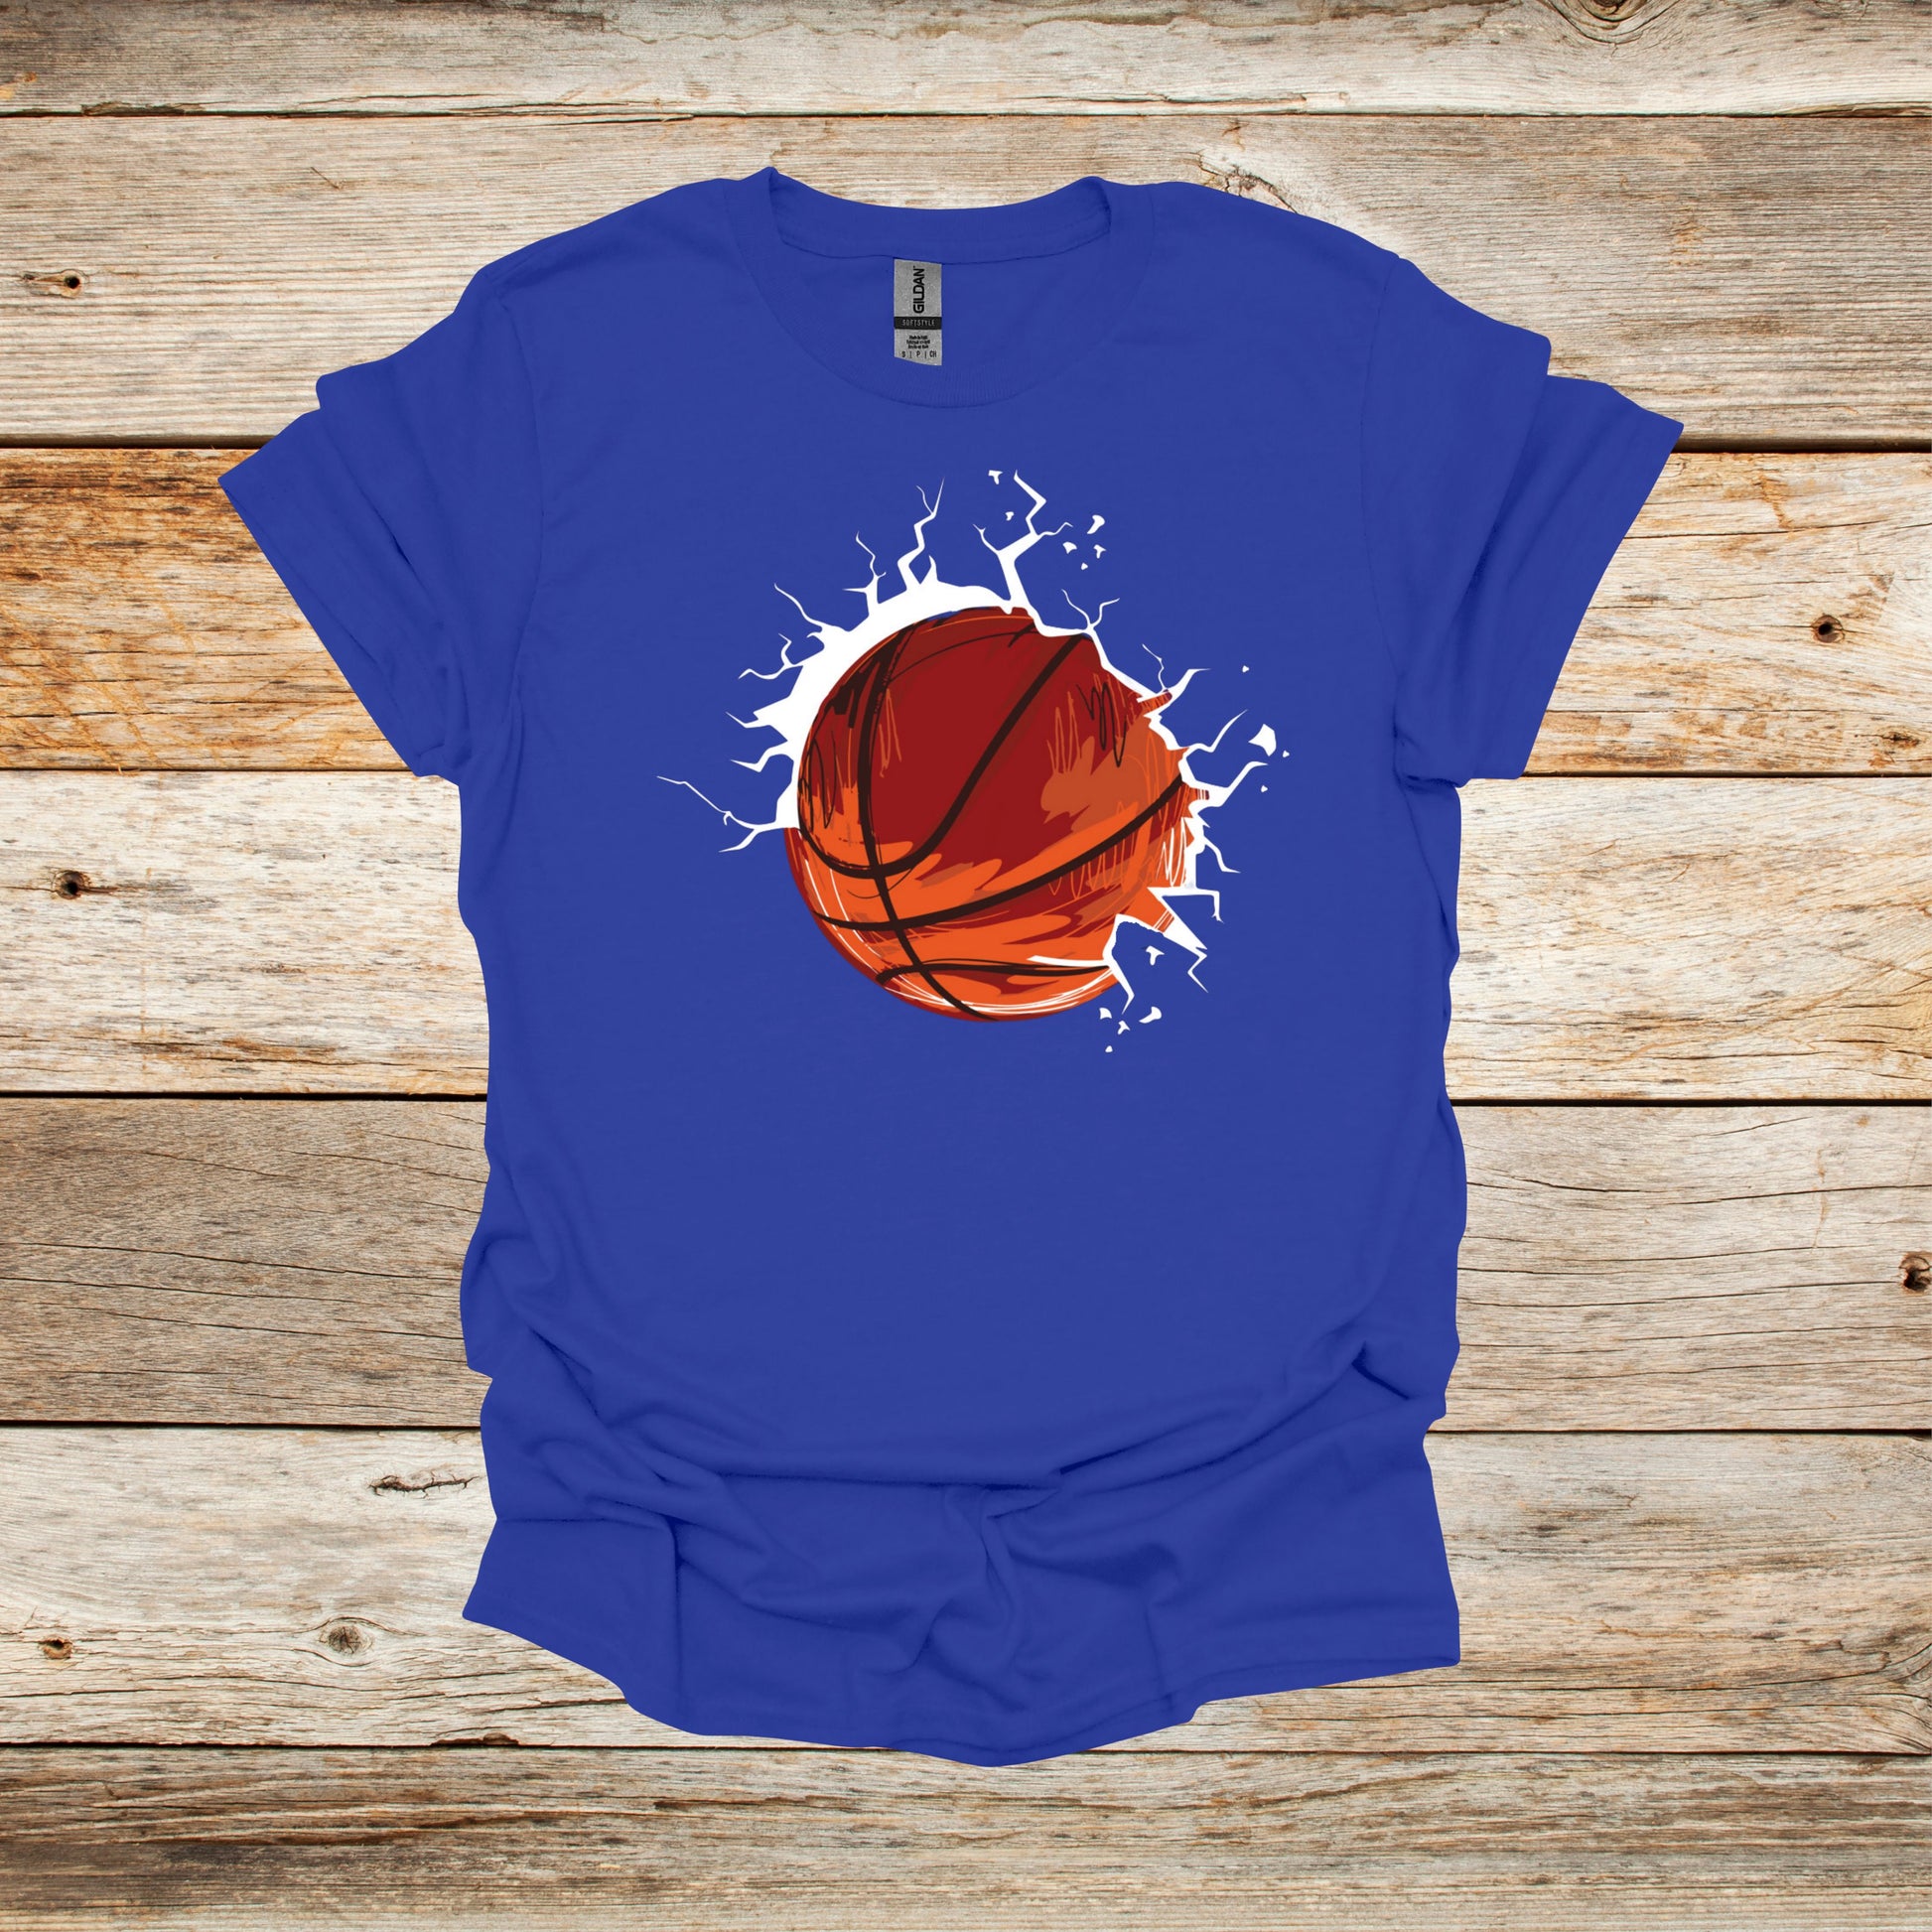 Basketball T-Shirt - Adult and Children's Tee Shirts - Sports T-Shirts Graphic Avenue Royal Blue Adult Small 